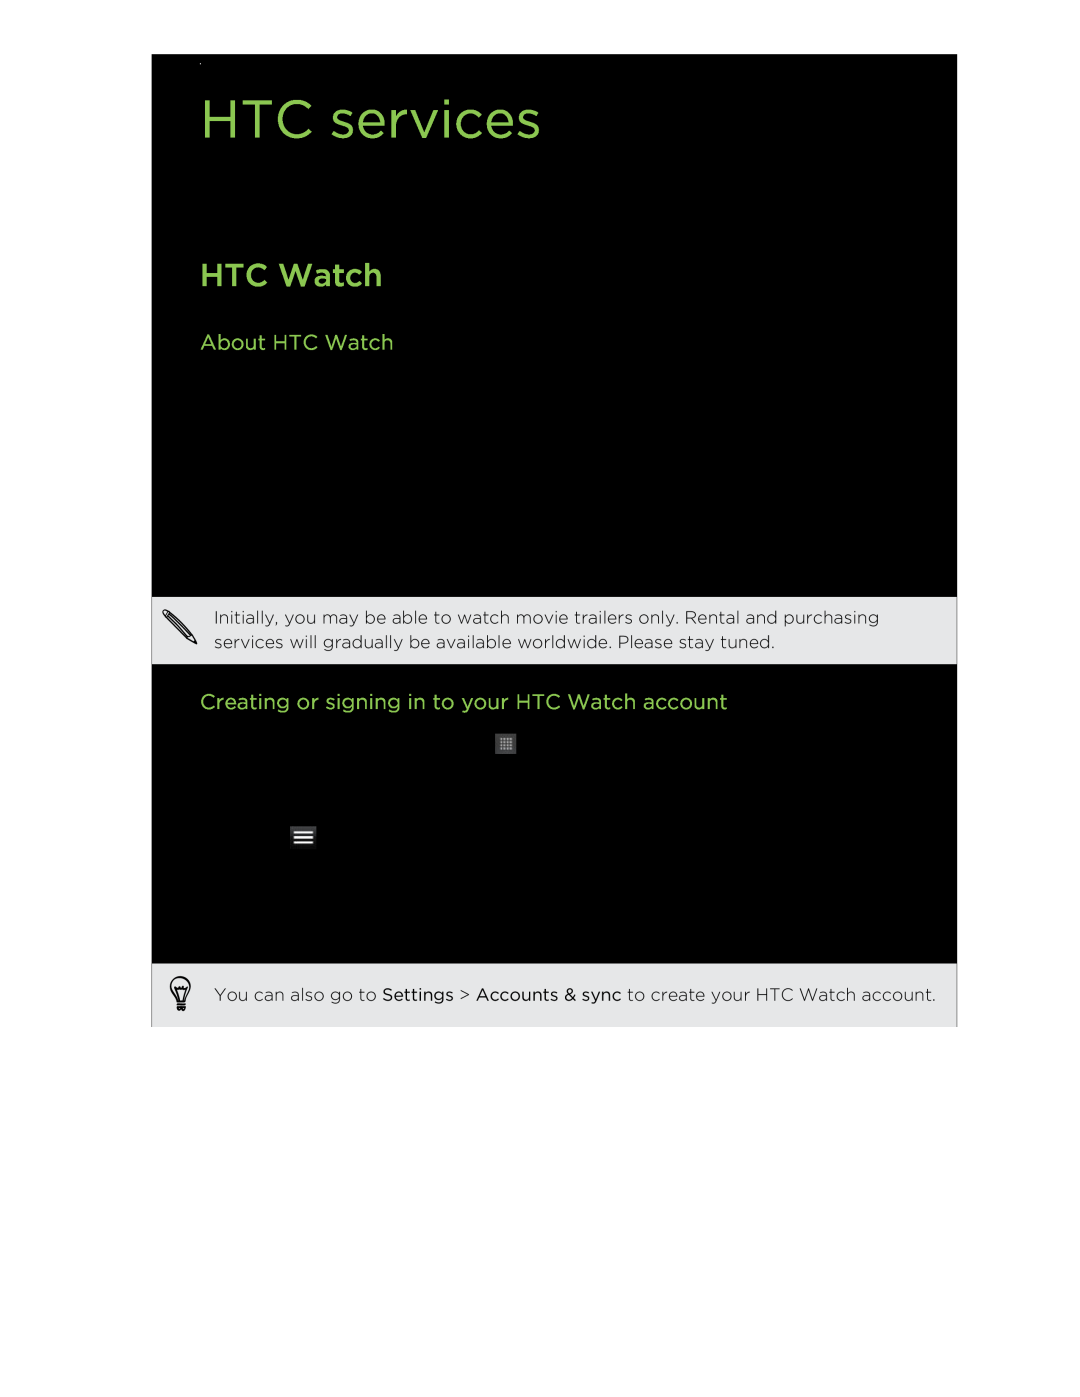 HTC HTCFlyerP512 manual HTC services, About HTC Watch, Creating or signing in to your HTC Watch account 